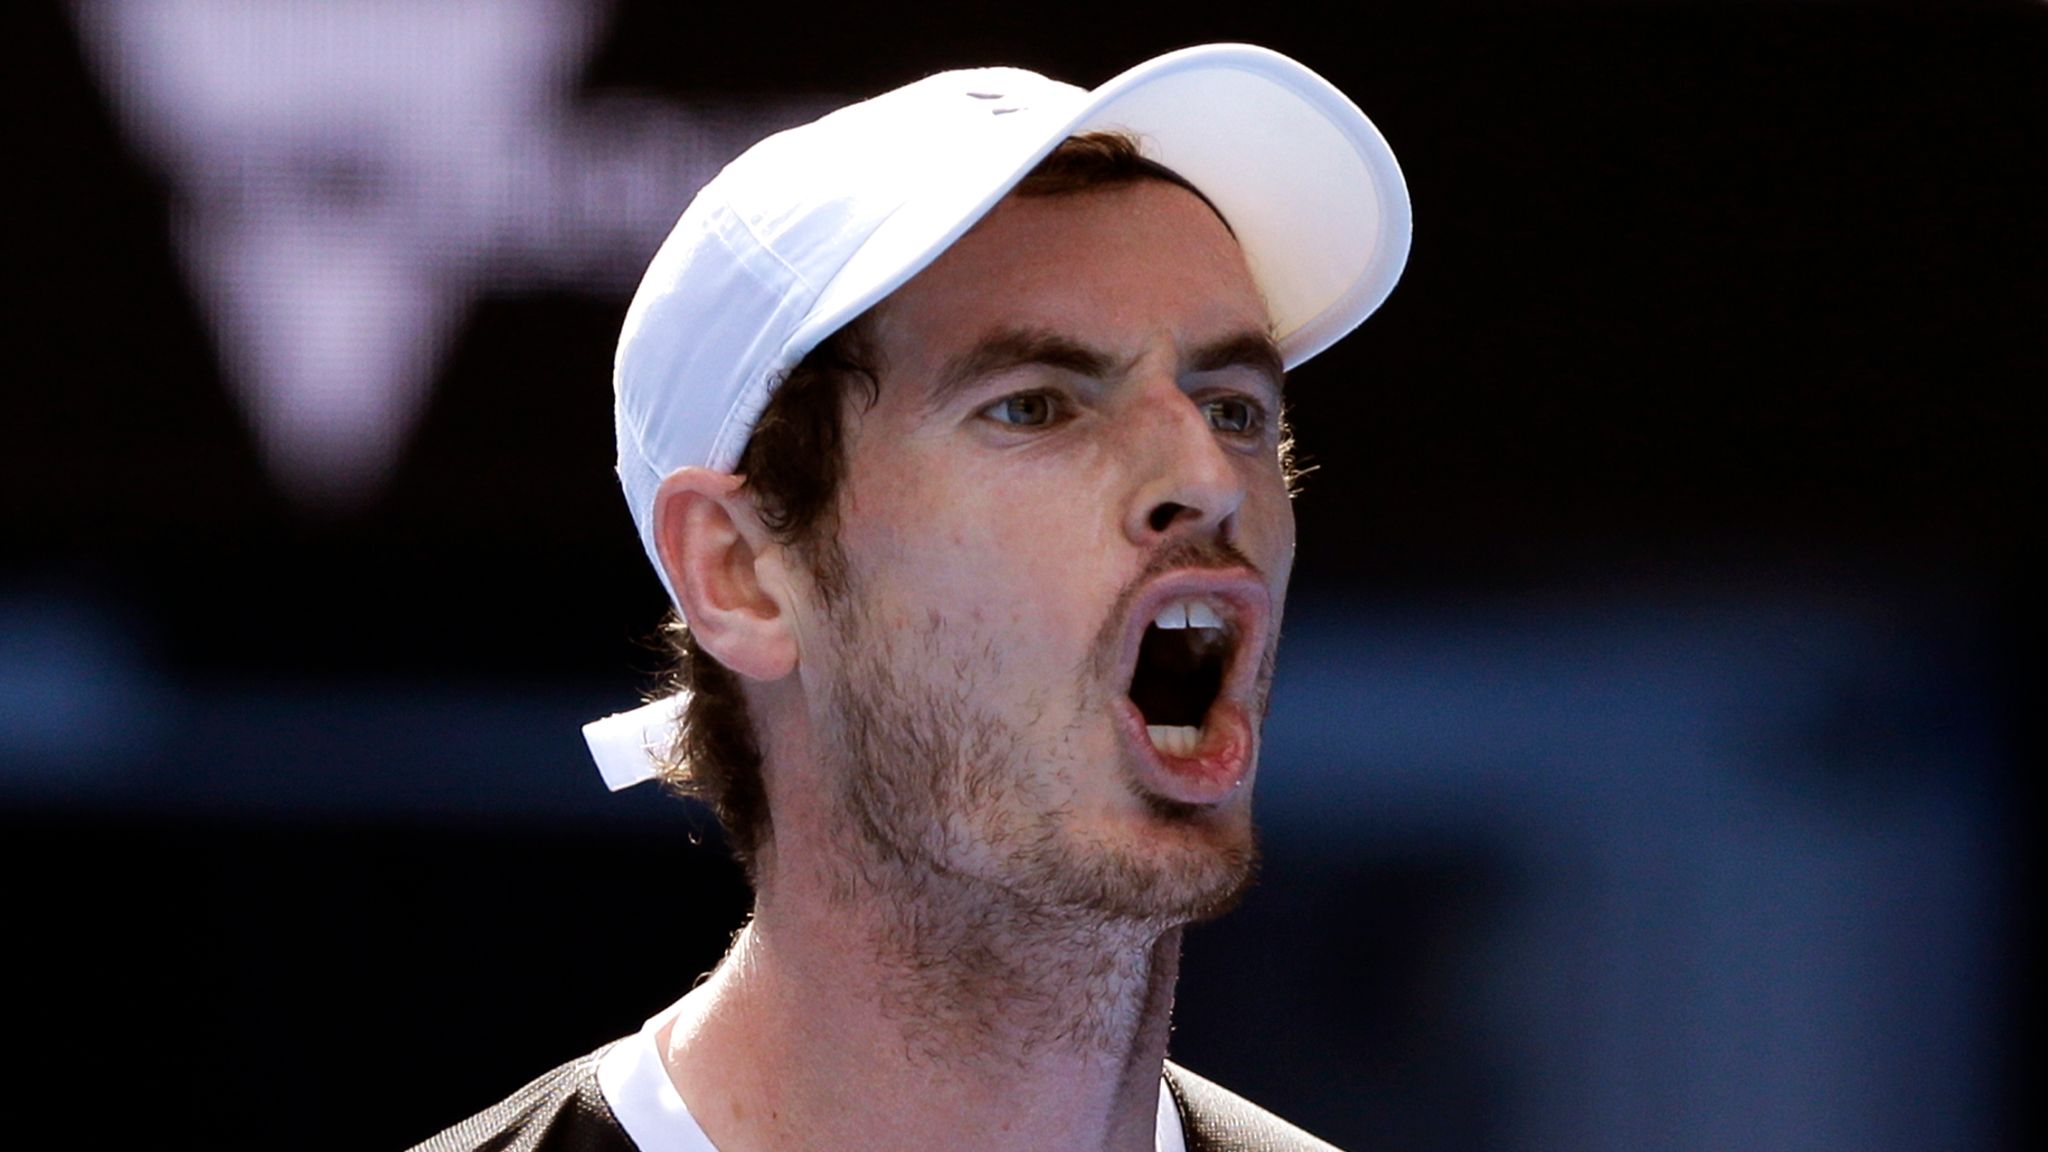 Andy Murray Blames Protocols At Lta Training Facility For His Covid 19 Case Tennis News Sky Sports